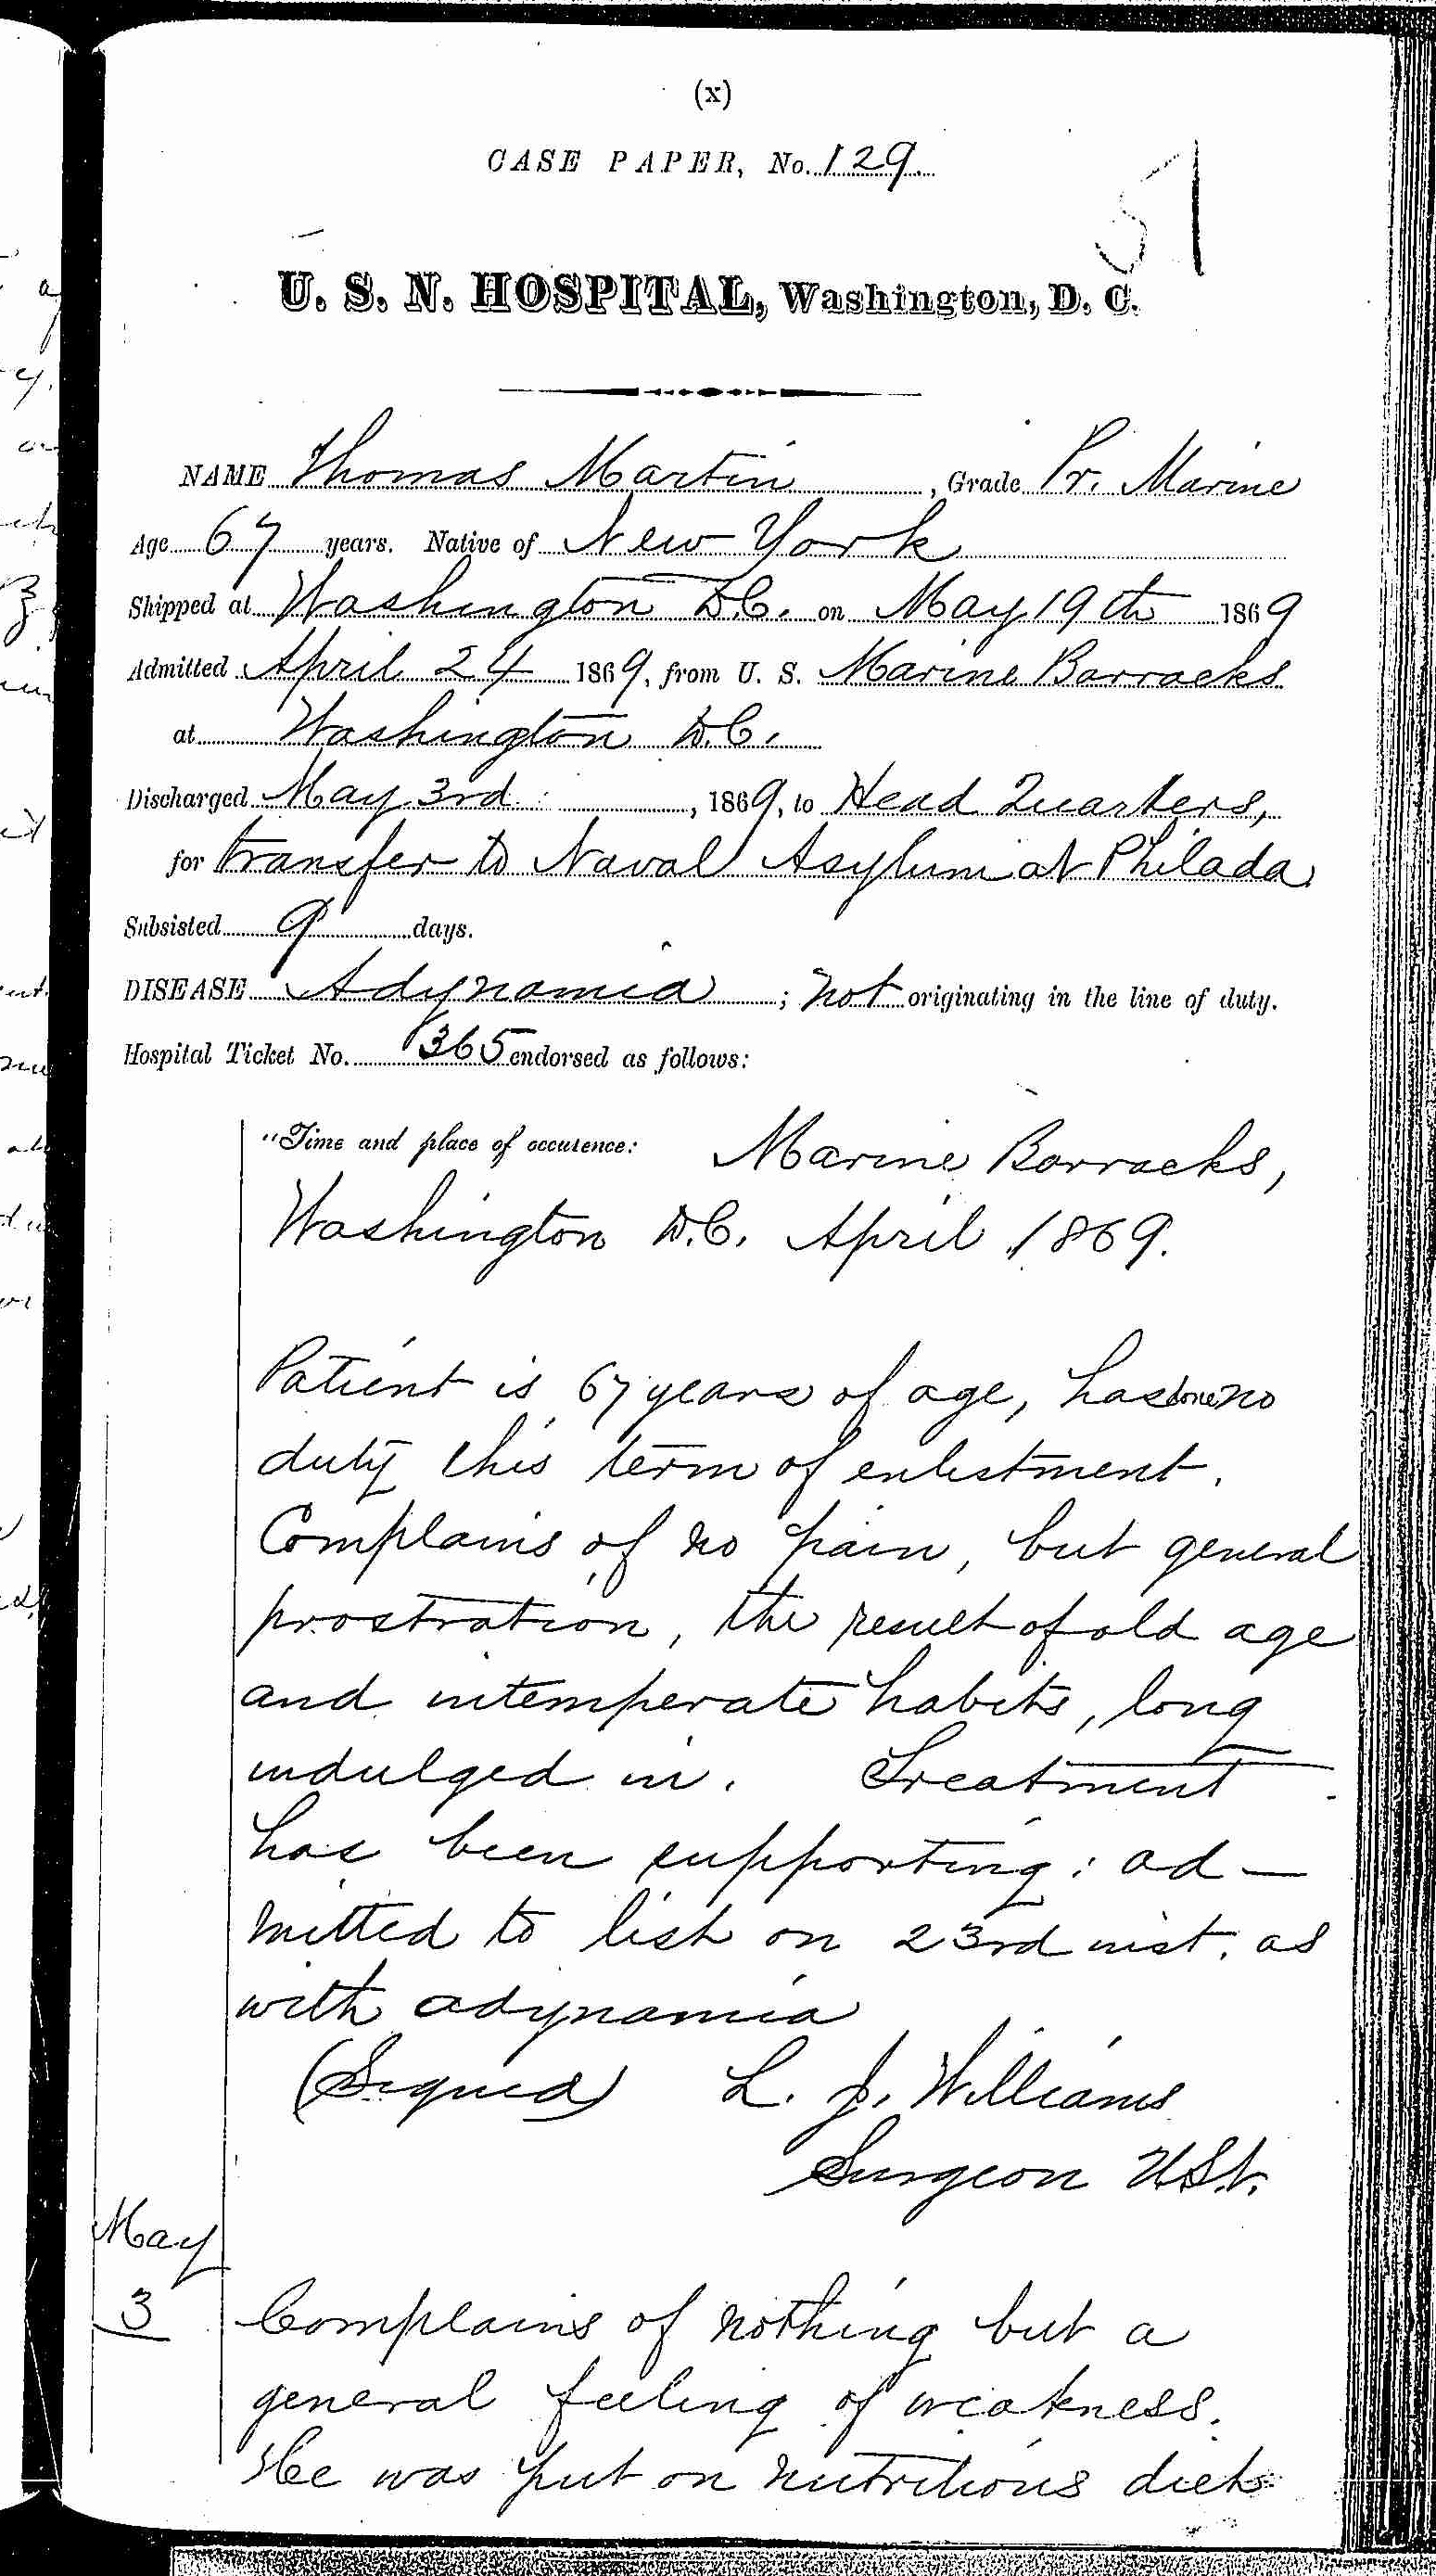 Entry for Thomas Martin (page 1 of 2) in the log Hospital Tickets and Case Papers - Naval Hospital - Washington, D.C. - 1868-69